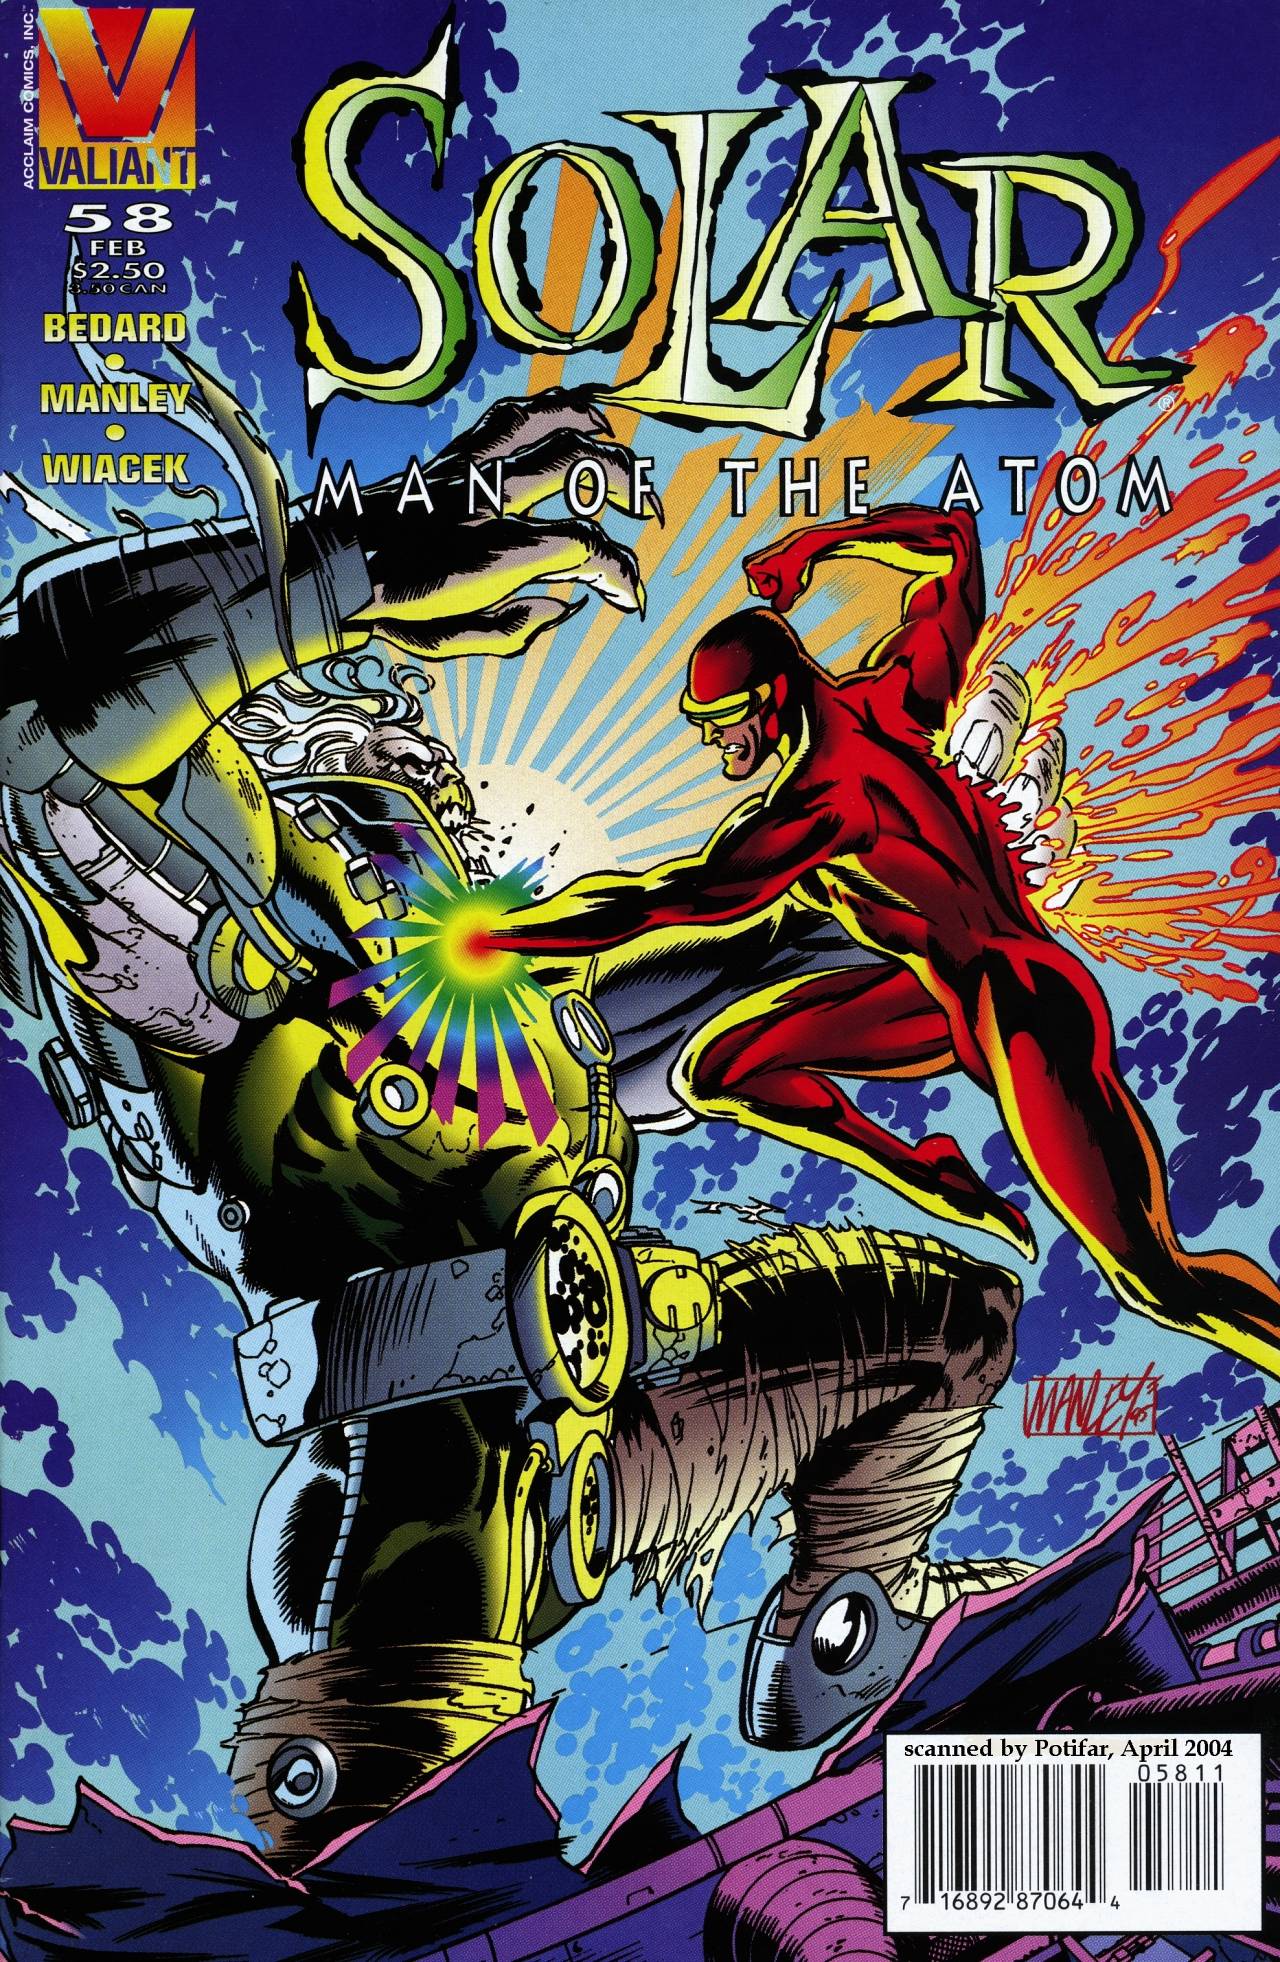 Read online Solar, Man of the Atom comic -  Issue #58 - 1